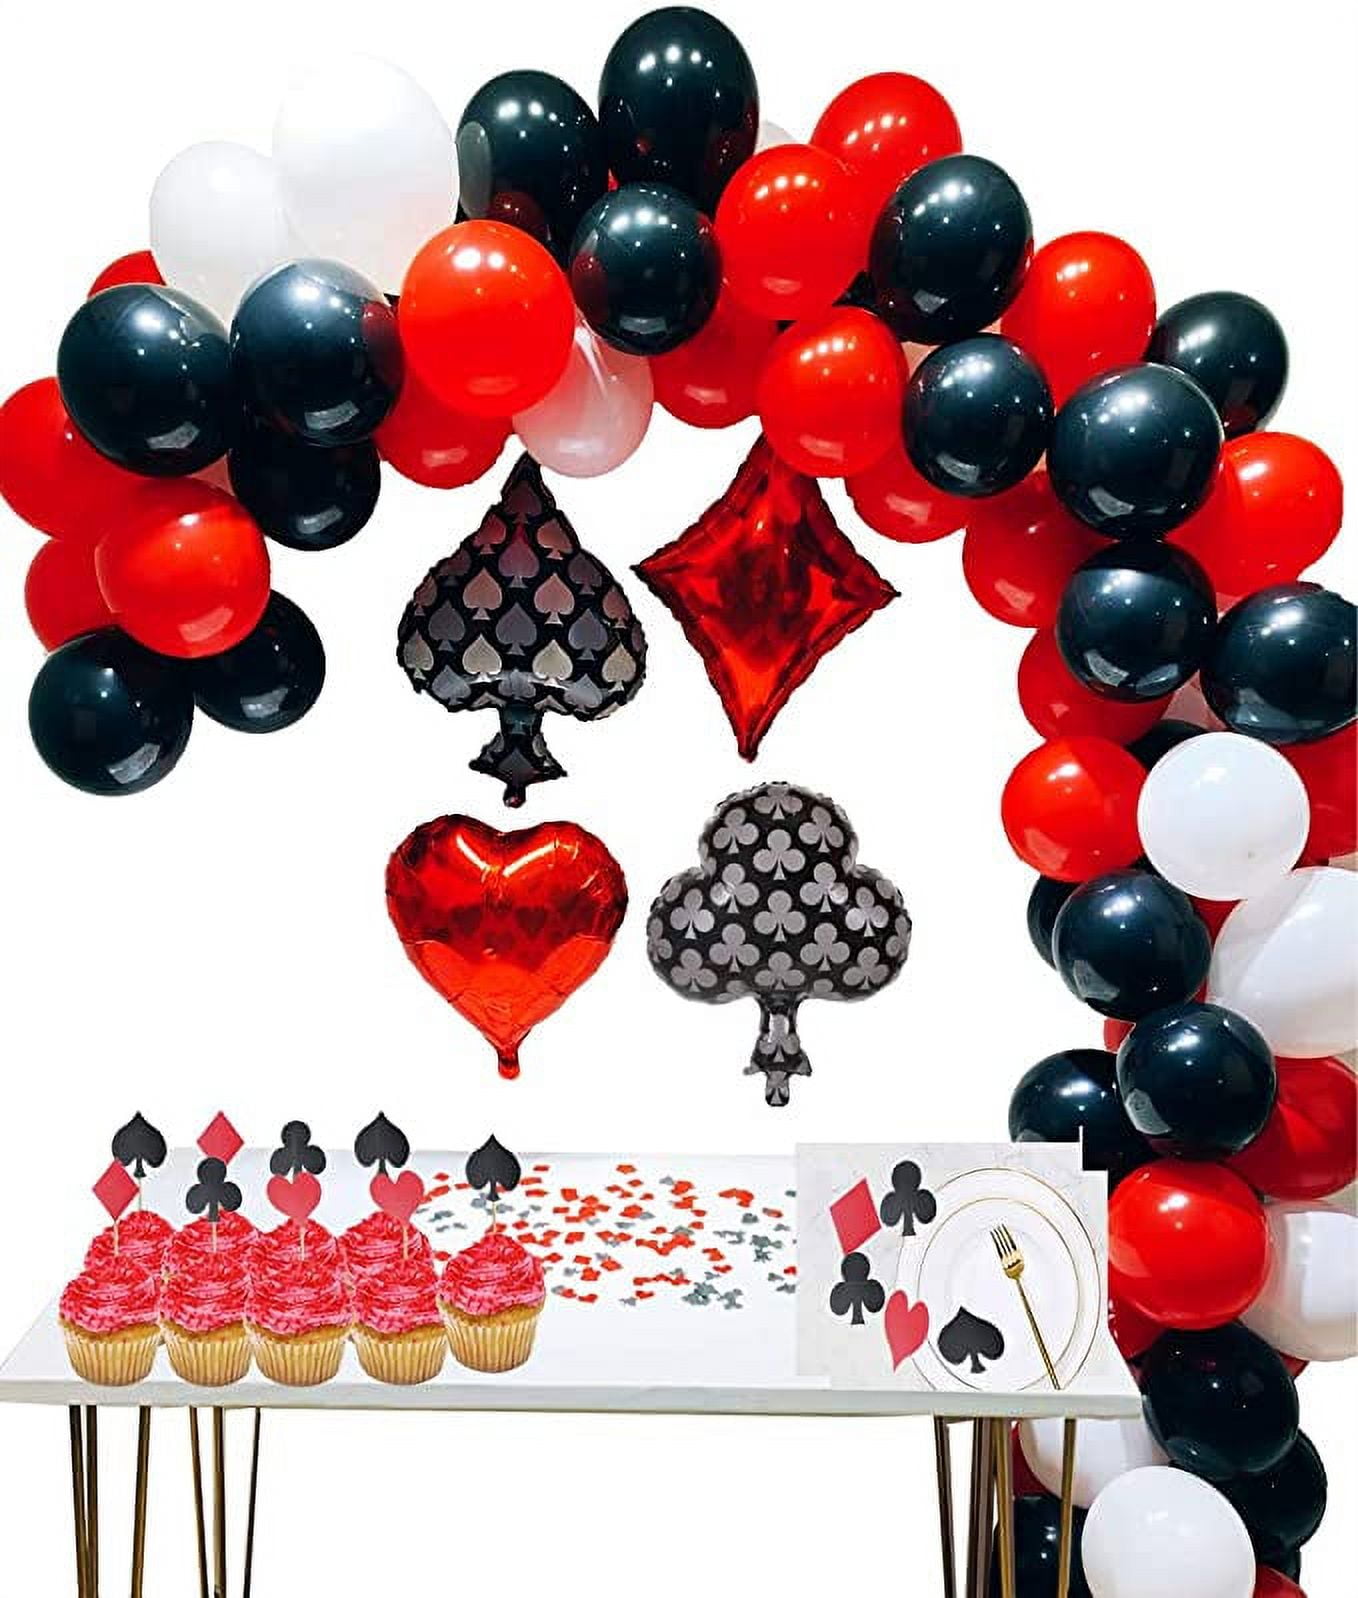 Casino Party Decoration Supplies Set: Casino Balloons,Black, Red